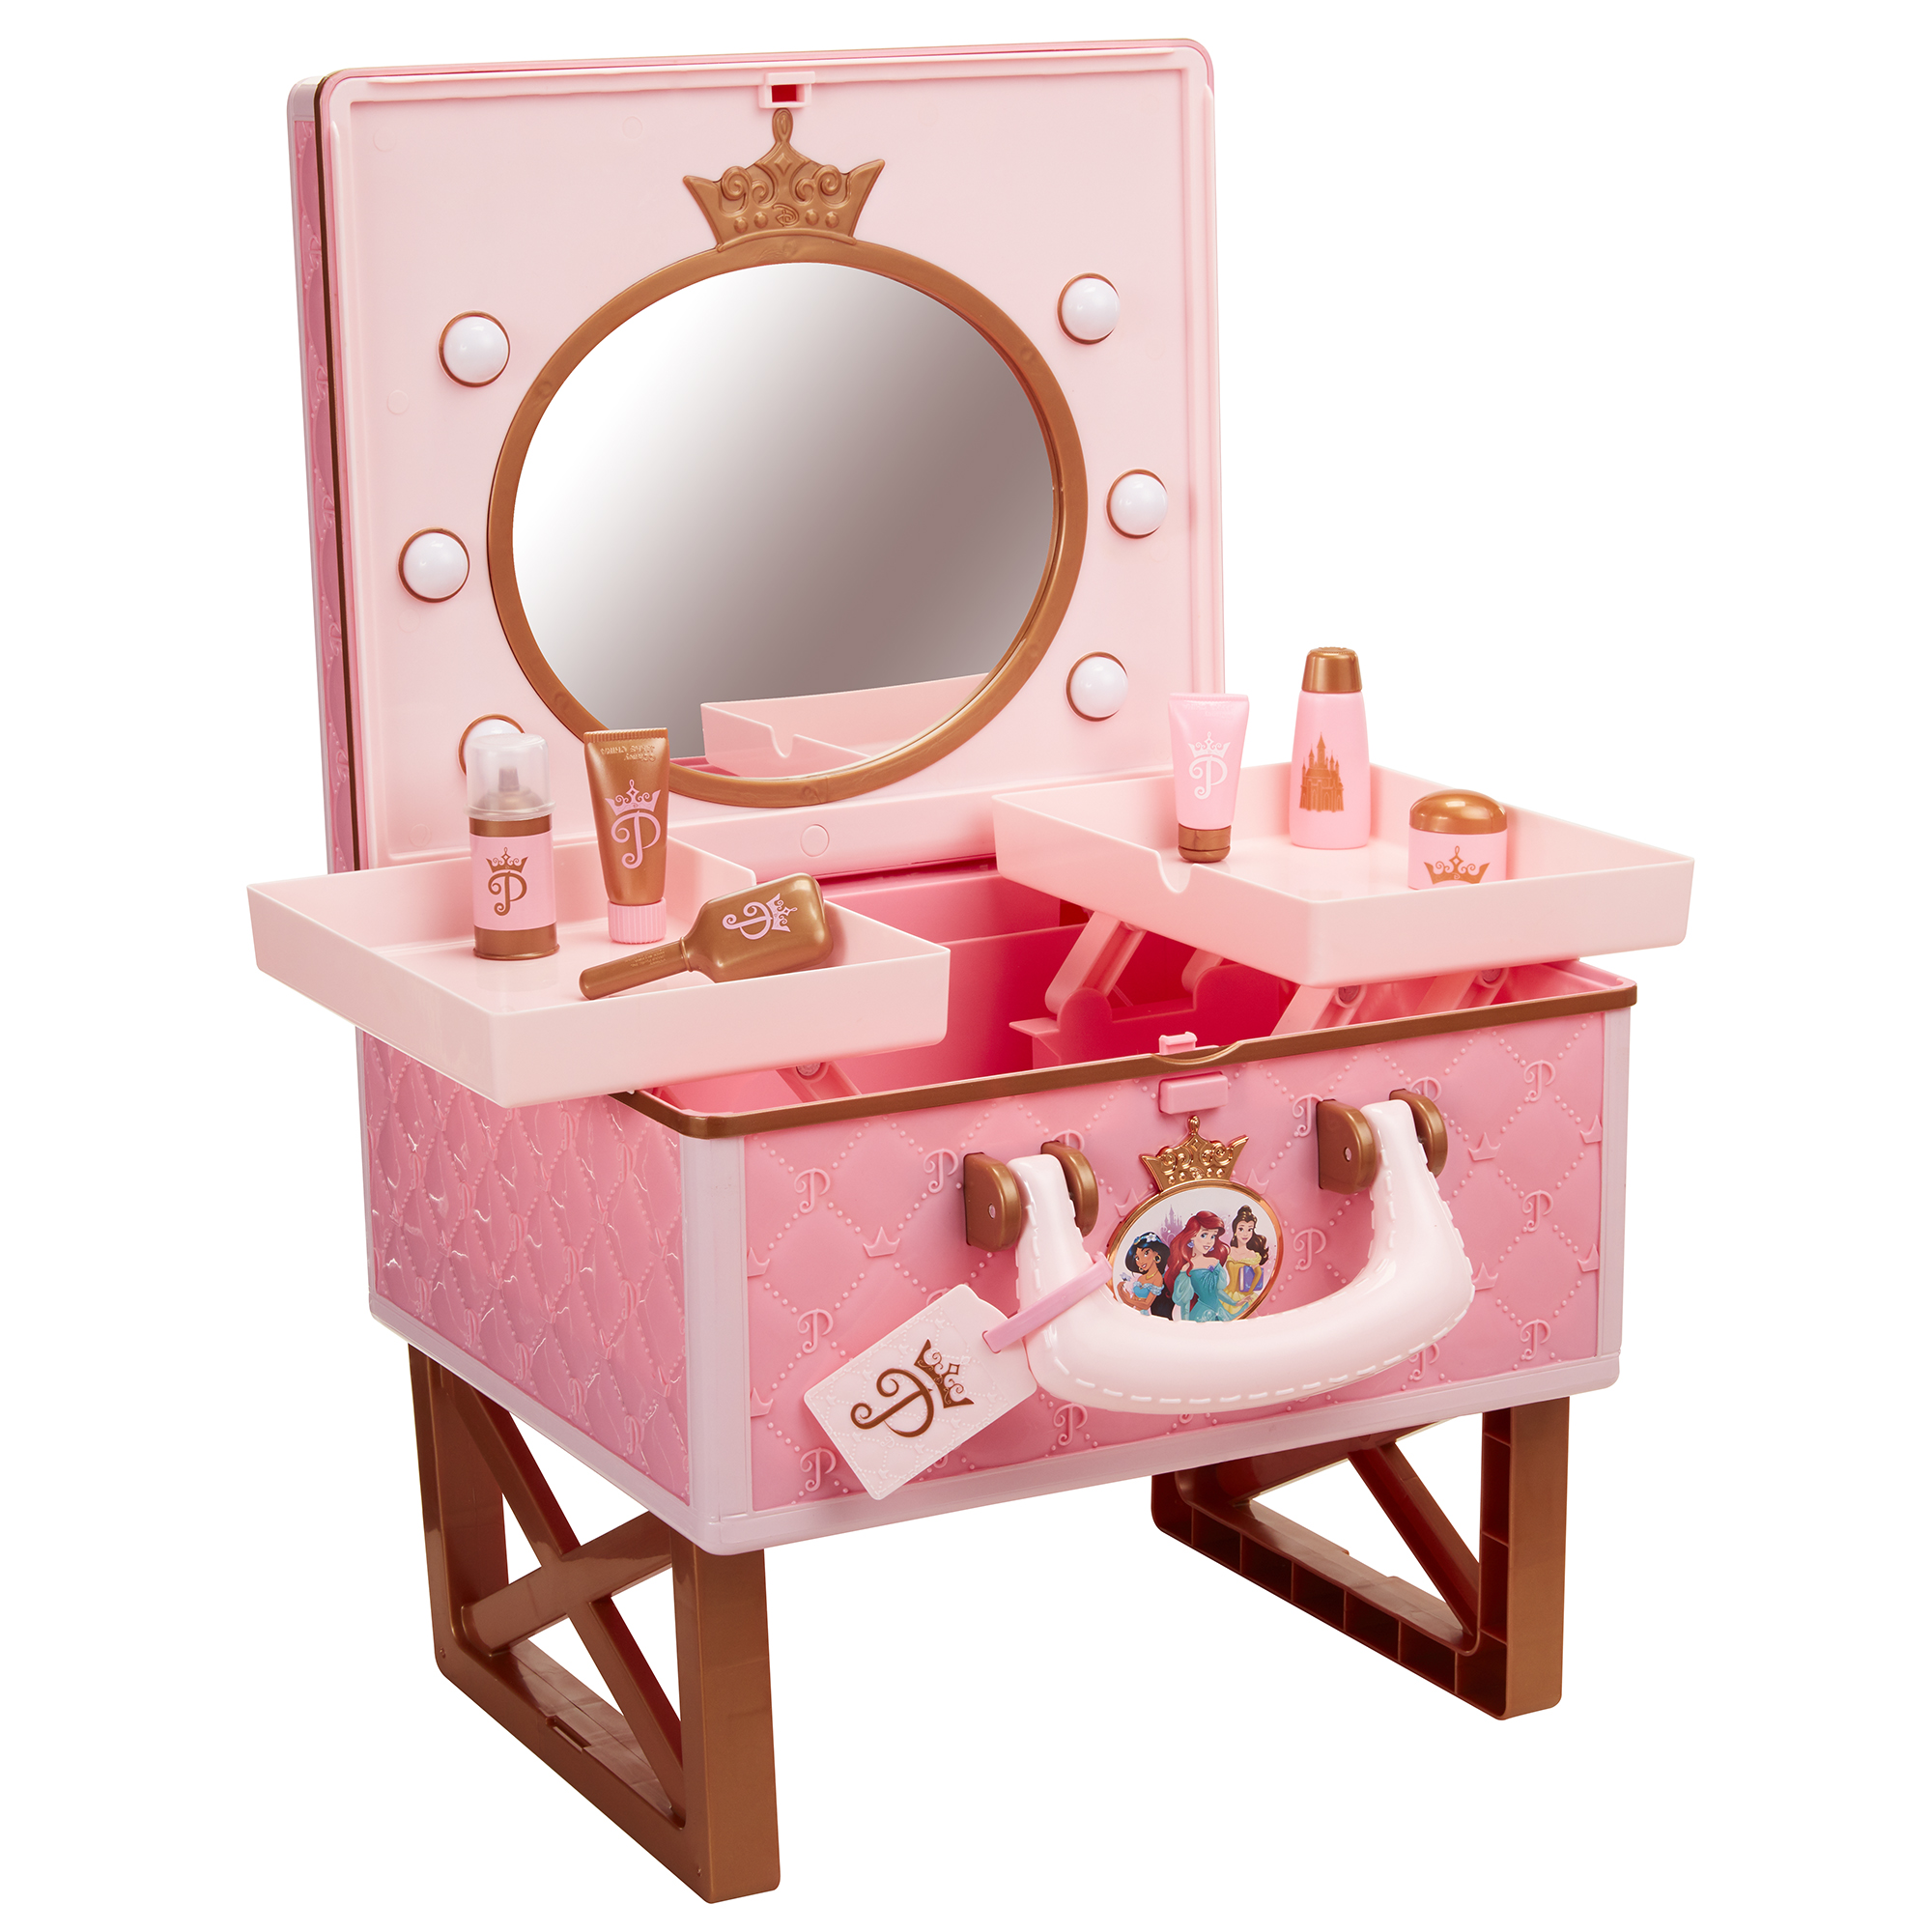 Disney Princess Style Collection Travel Vanity Doll Accessories, 7 Pieces - image 3 of 7